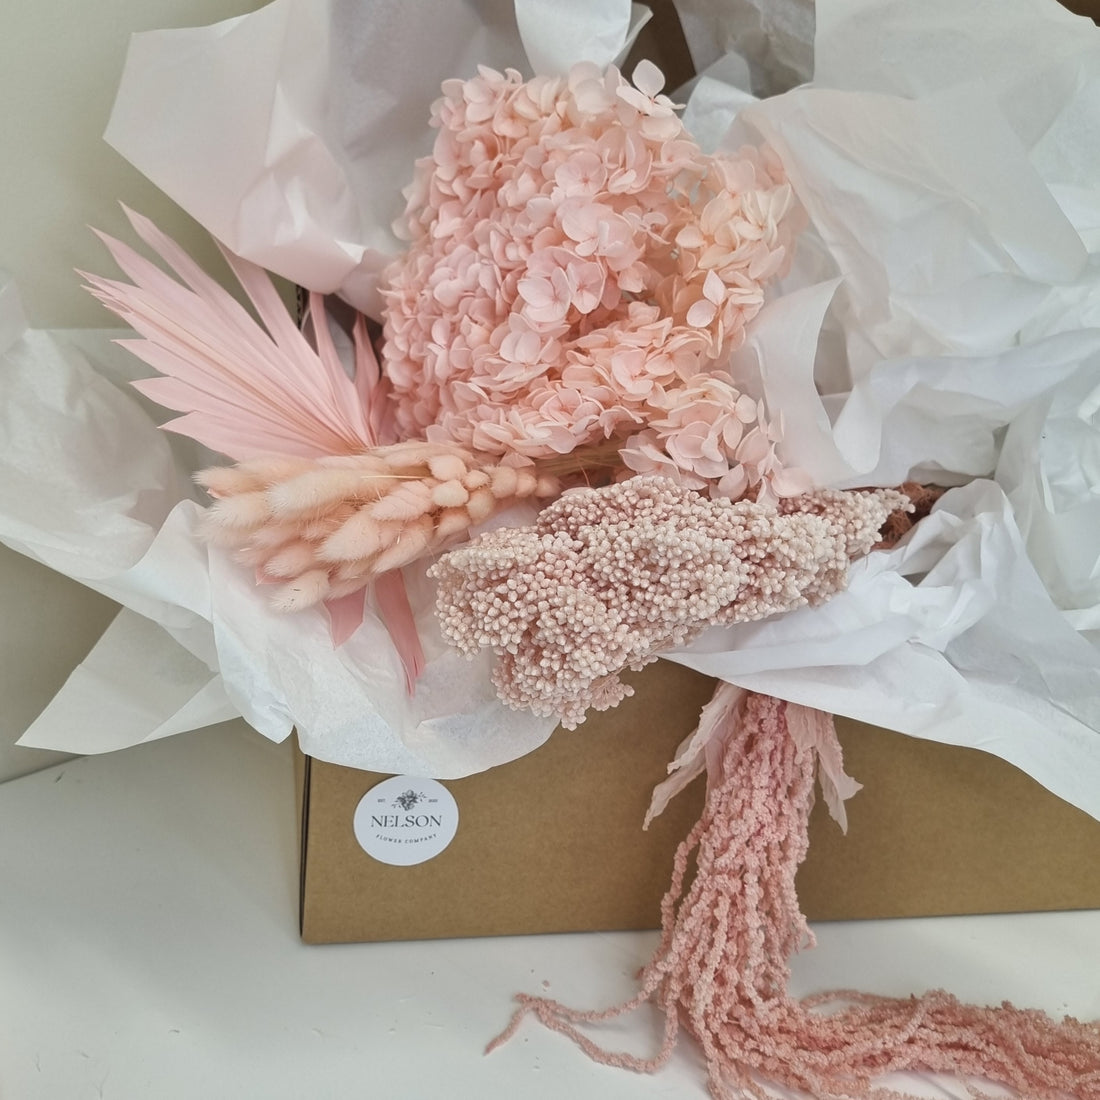 Blush Baby Dried Flower Box in cardboard box with white tissue paper.